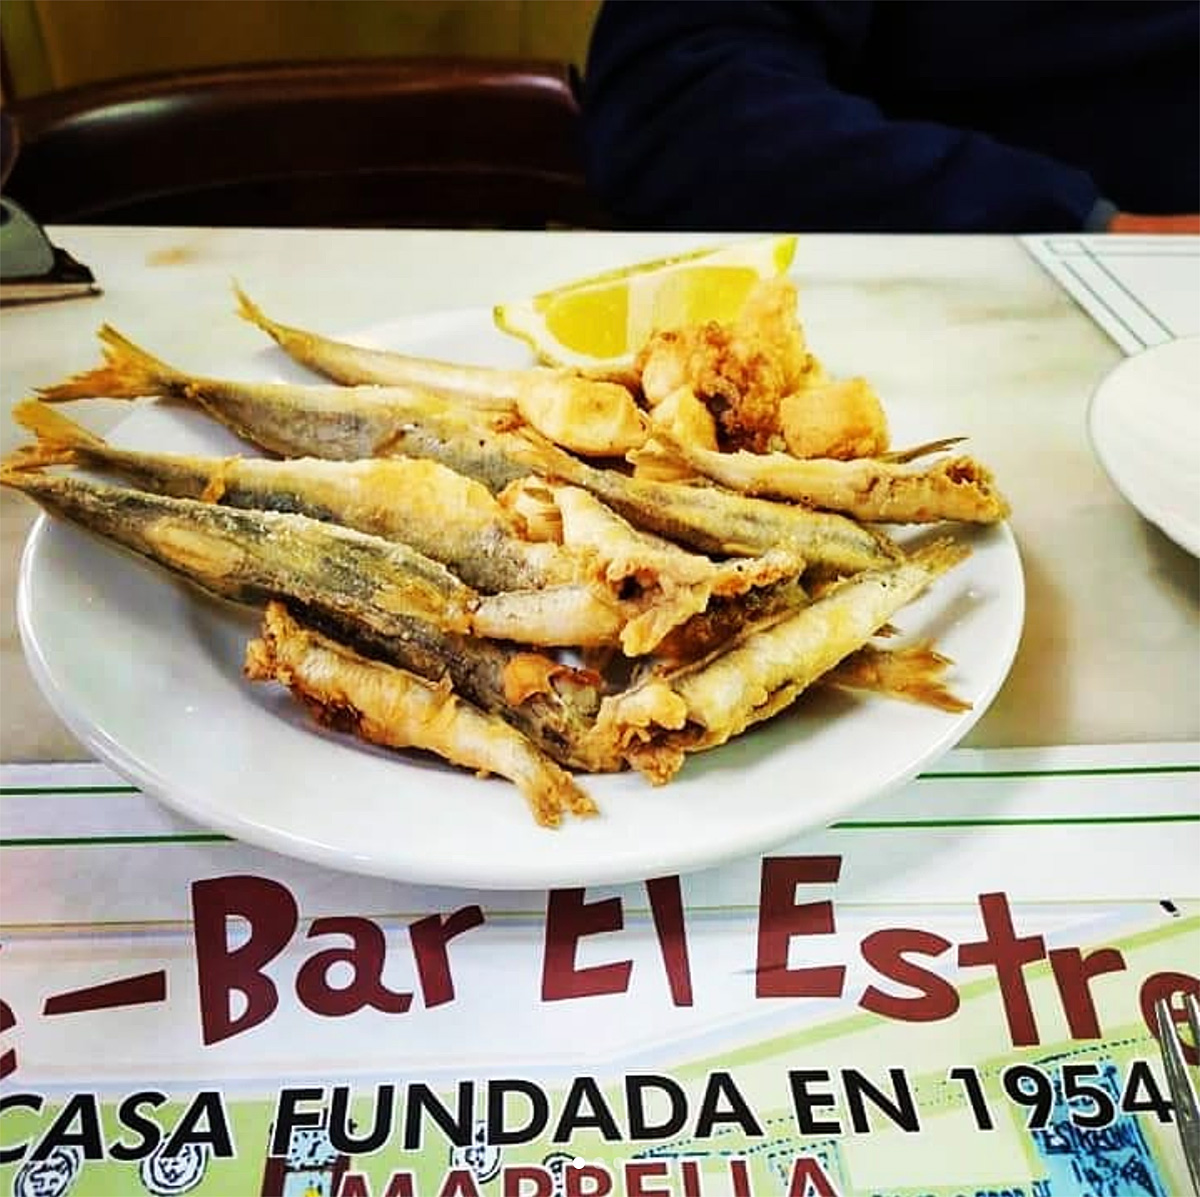 If you fancy tapas then Estrecho is the place to go